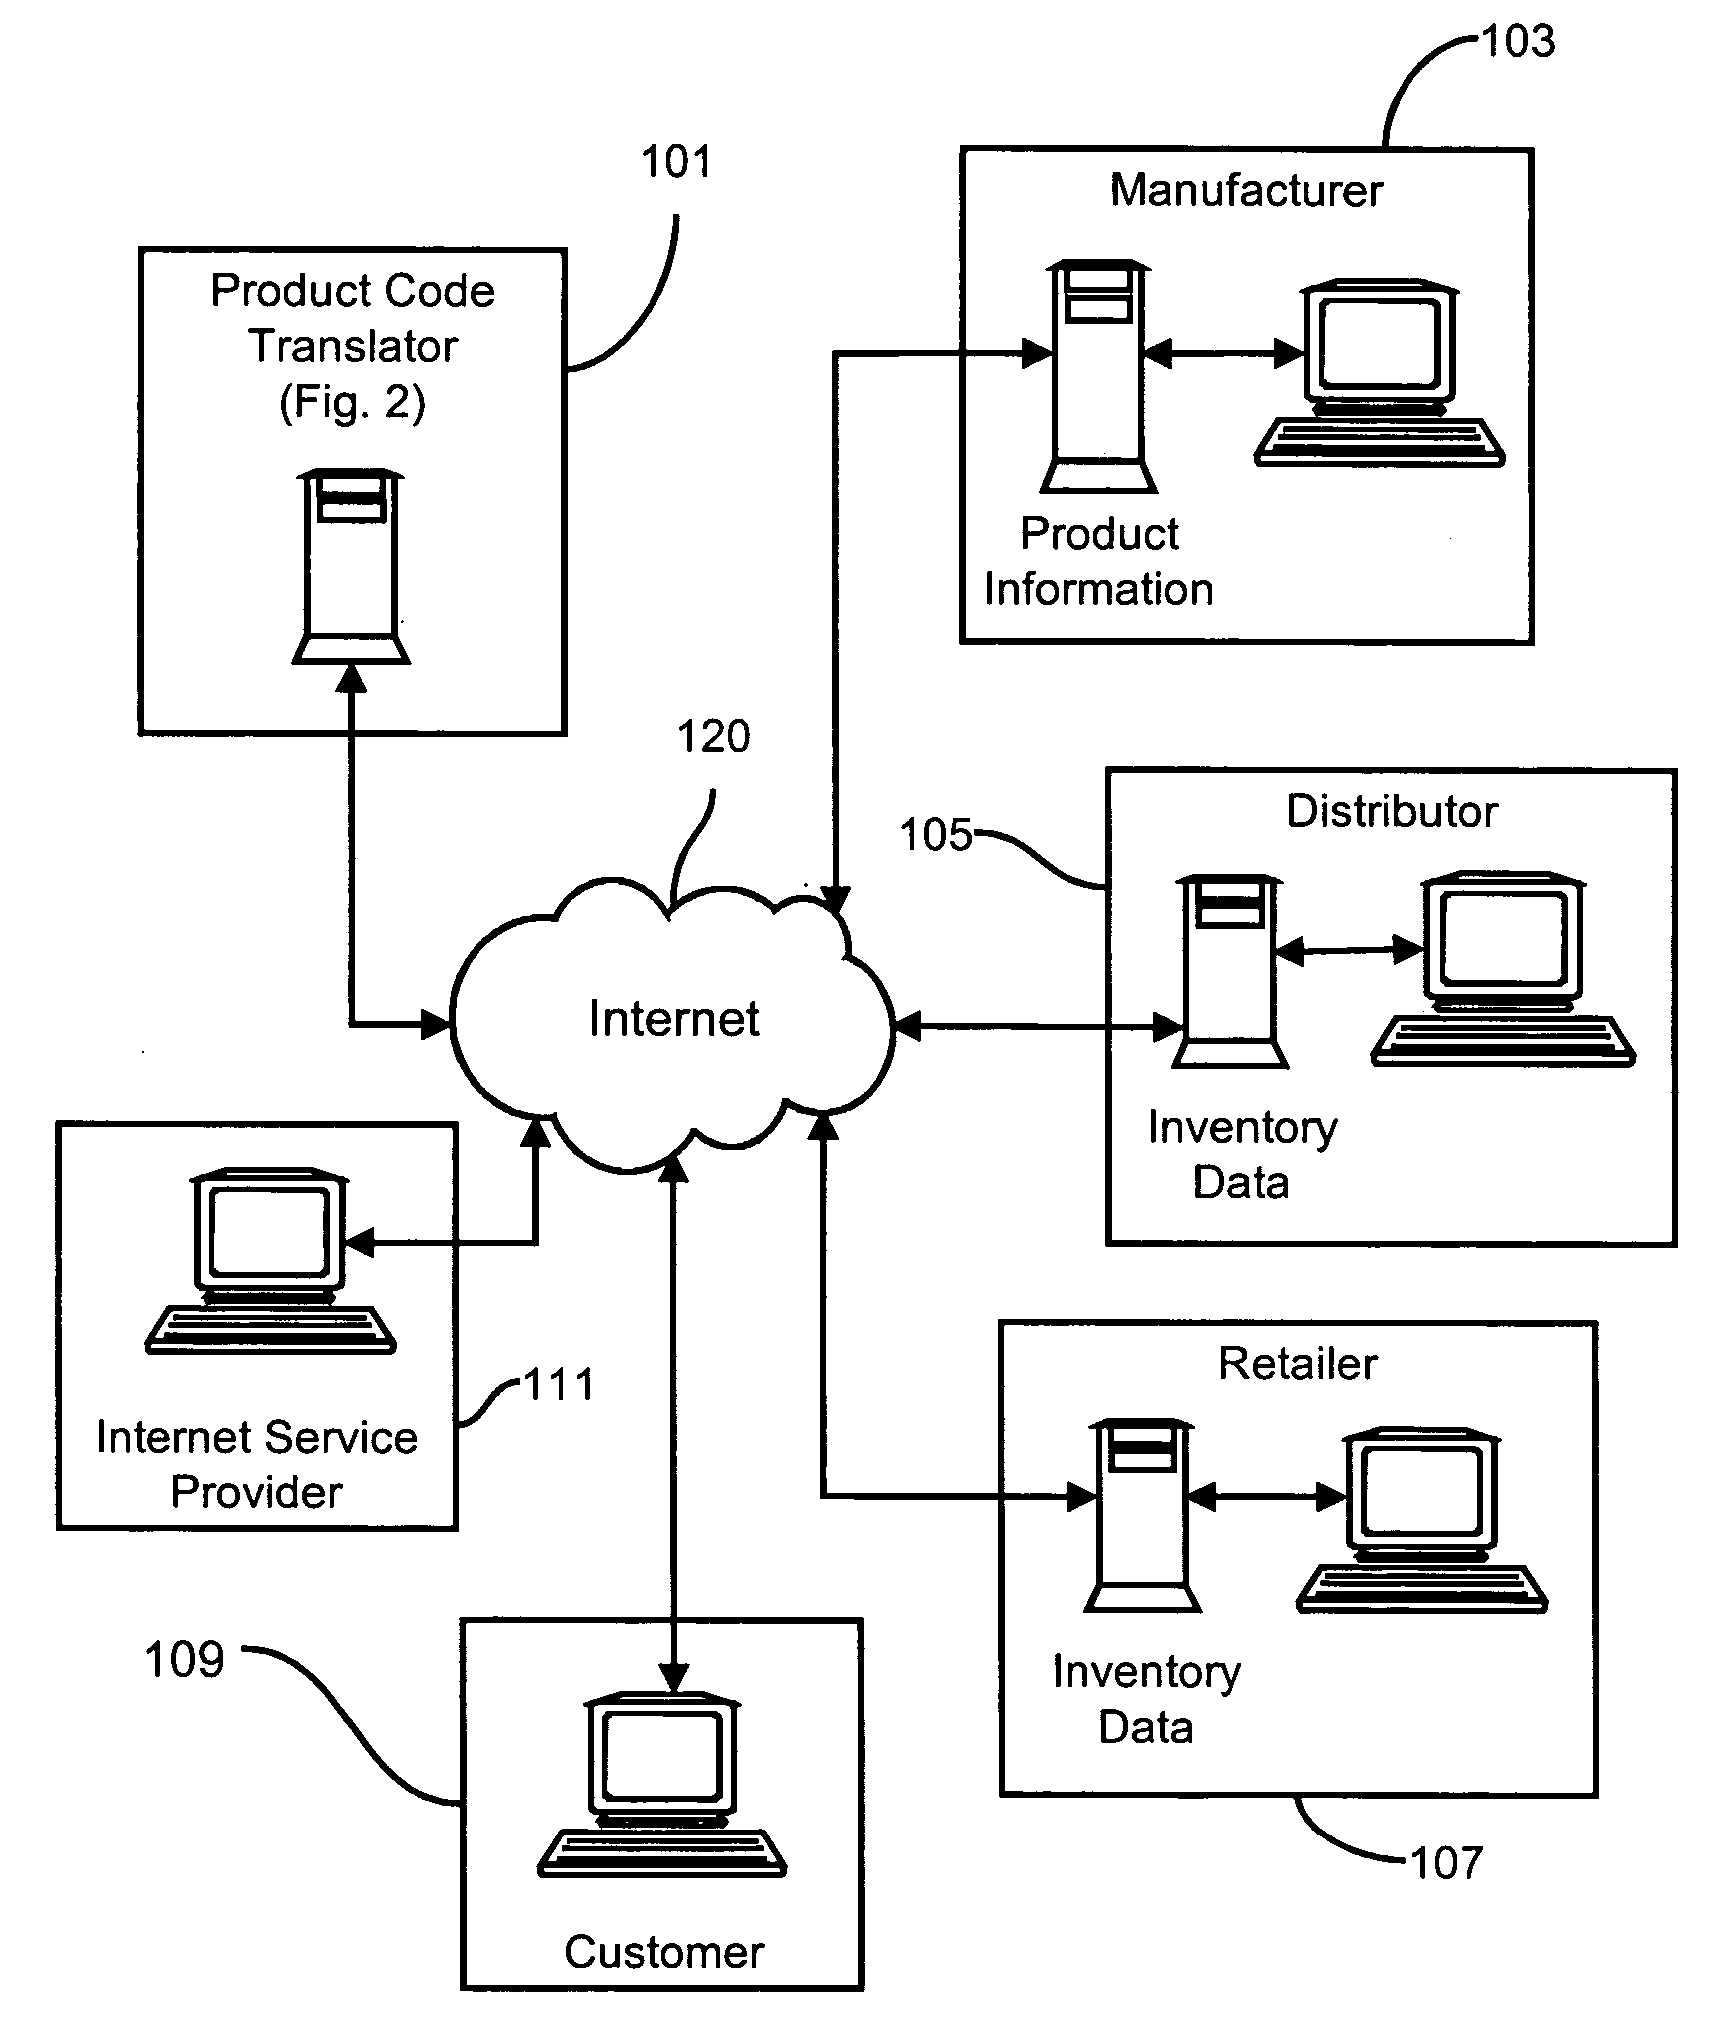 Methods and apparatus for transferring product information from manufacturers to retailers and distributors via the Internet